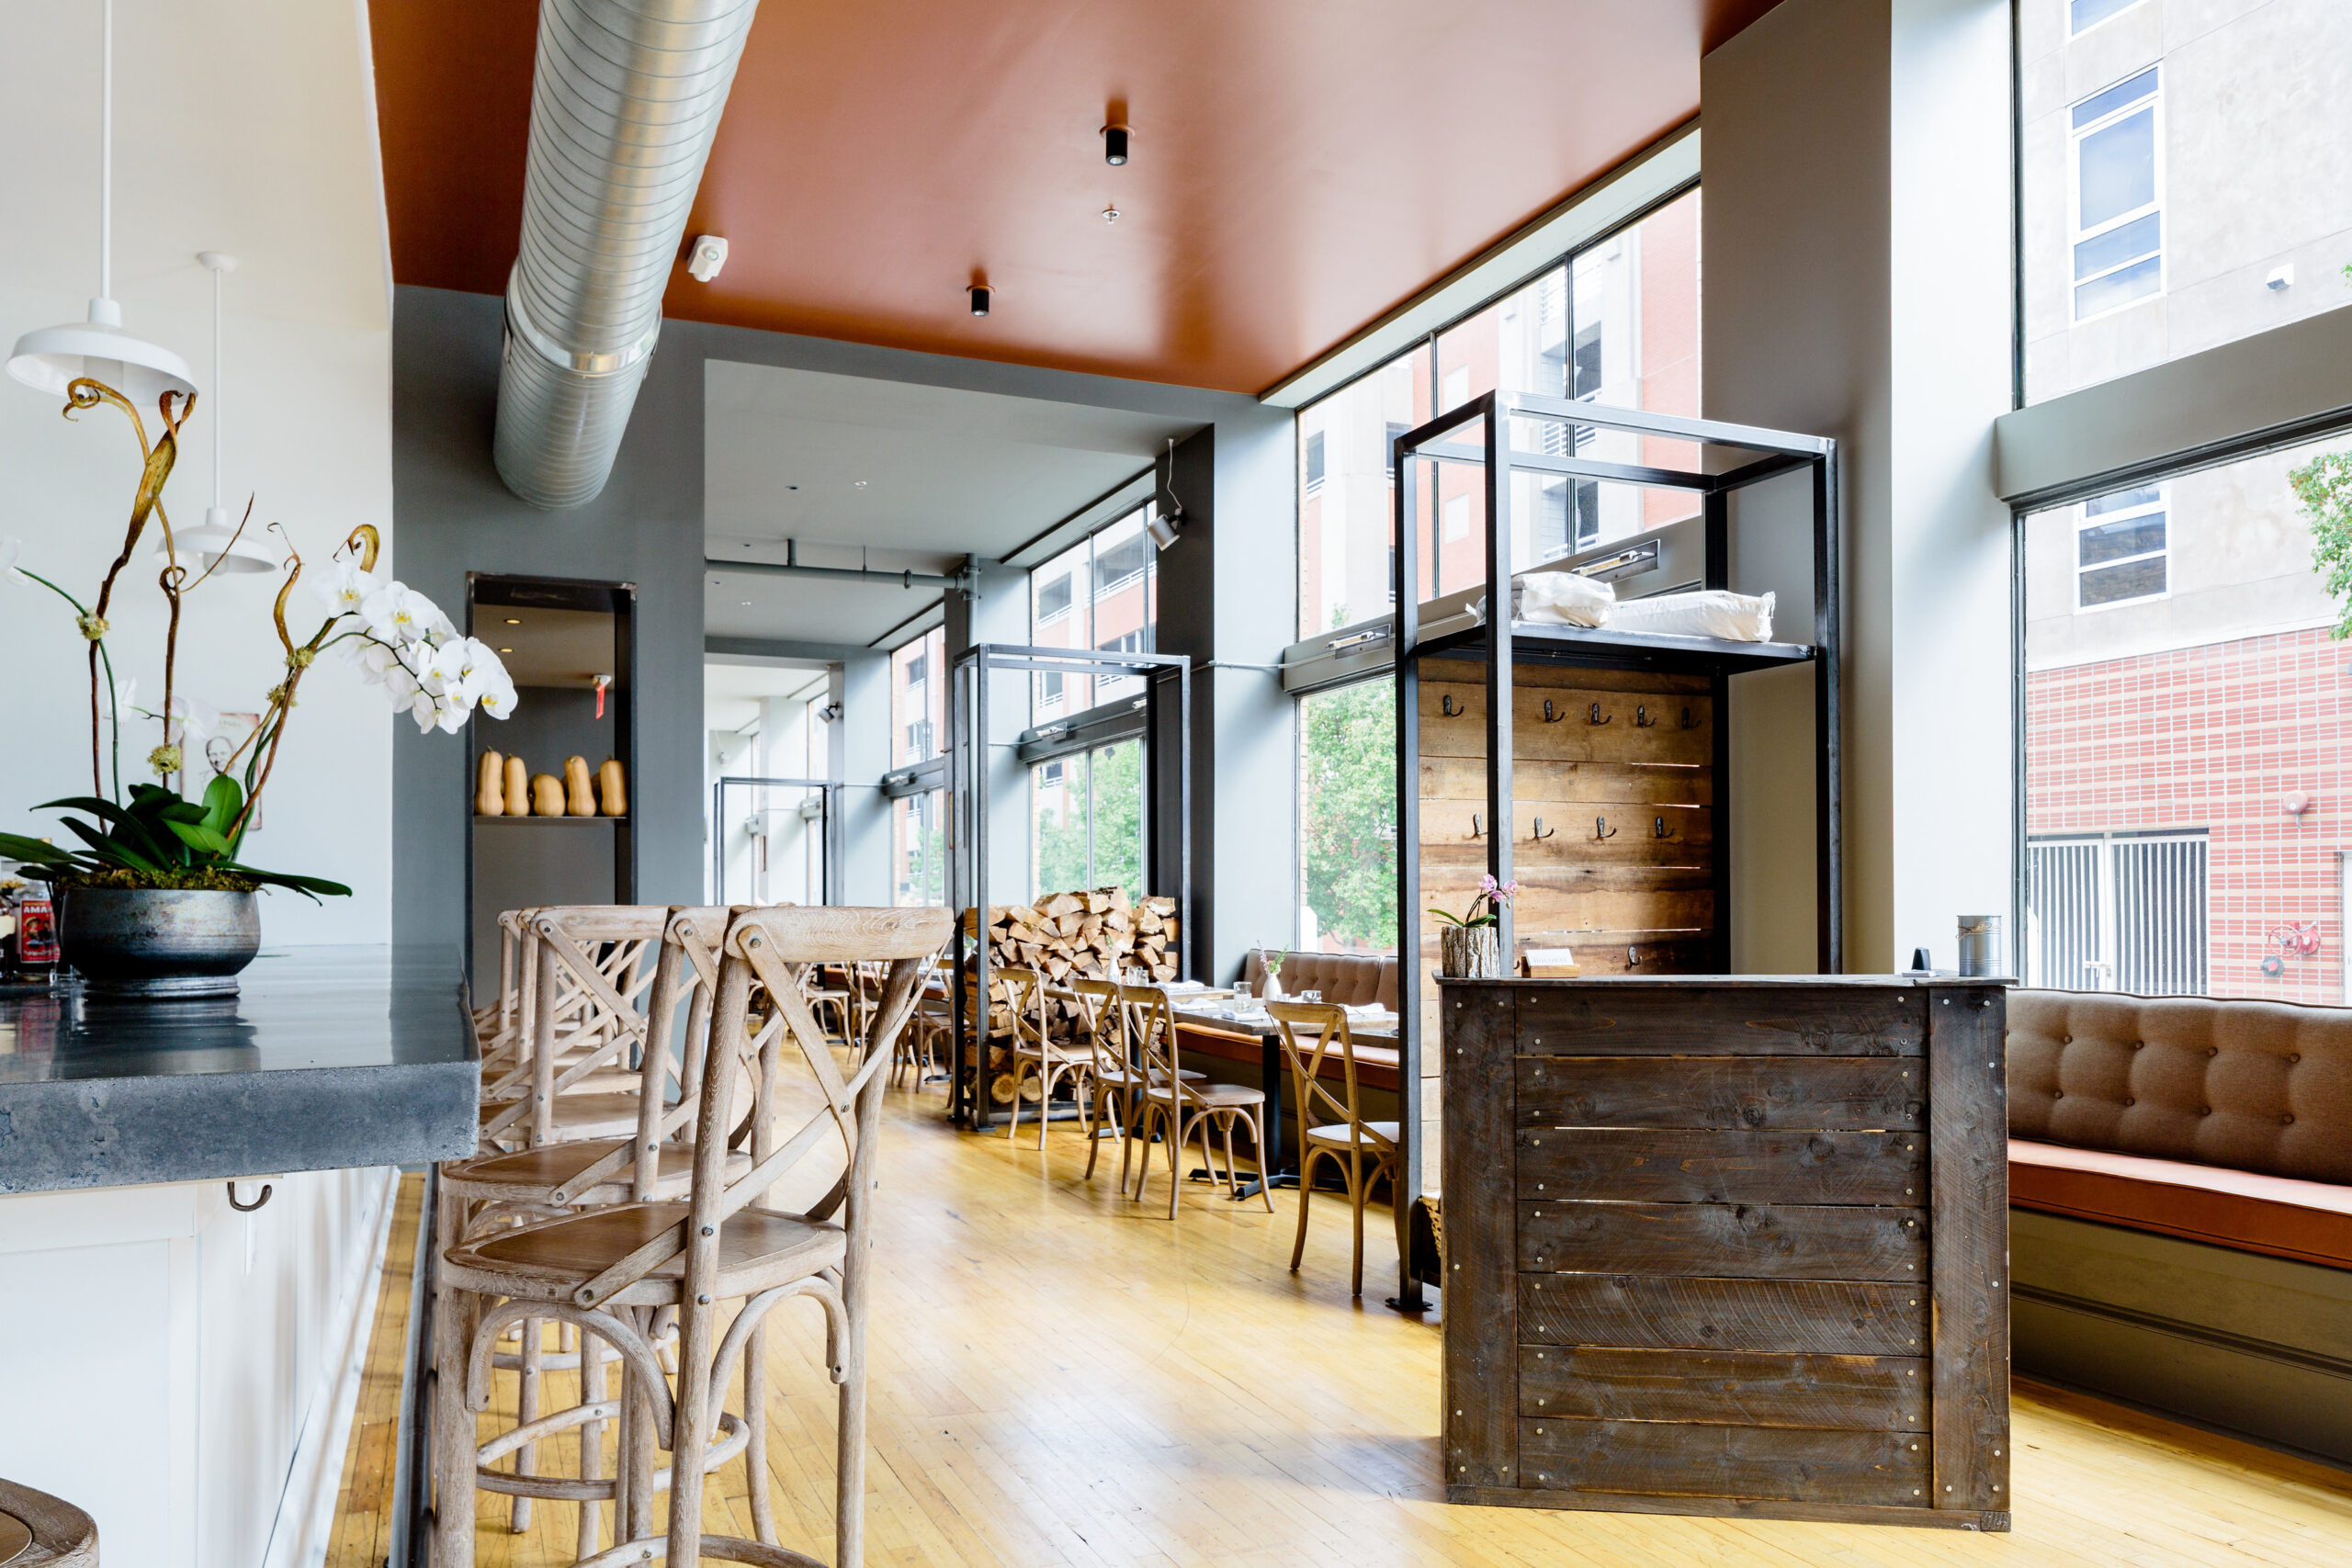 Featured image for “Knoxville News Sentinel: J.C. Holdway Restaurant design plays up view”